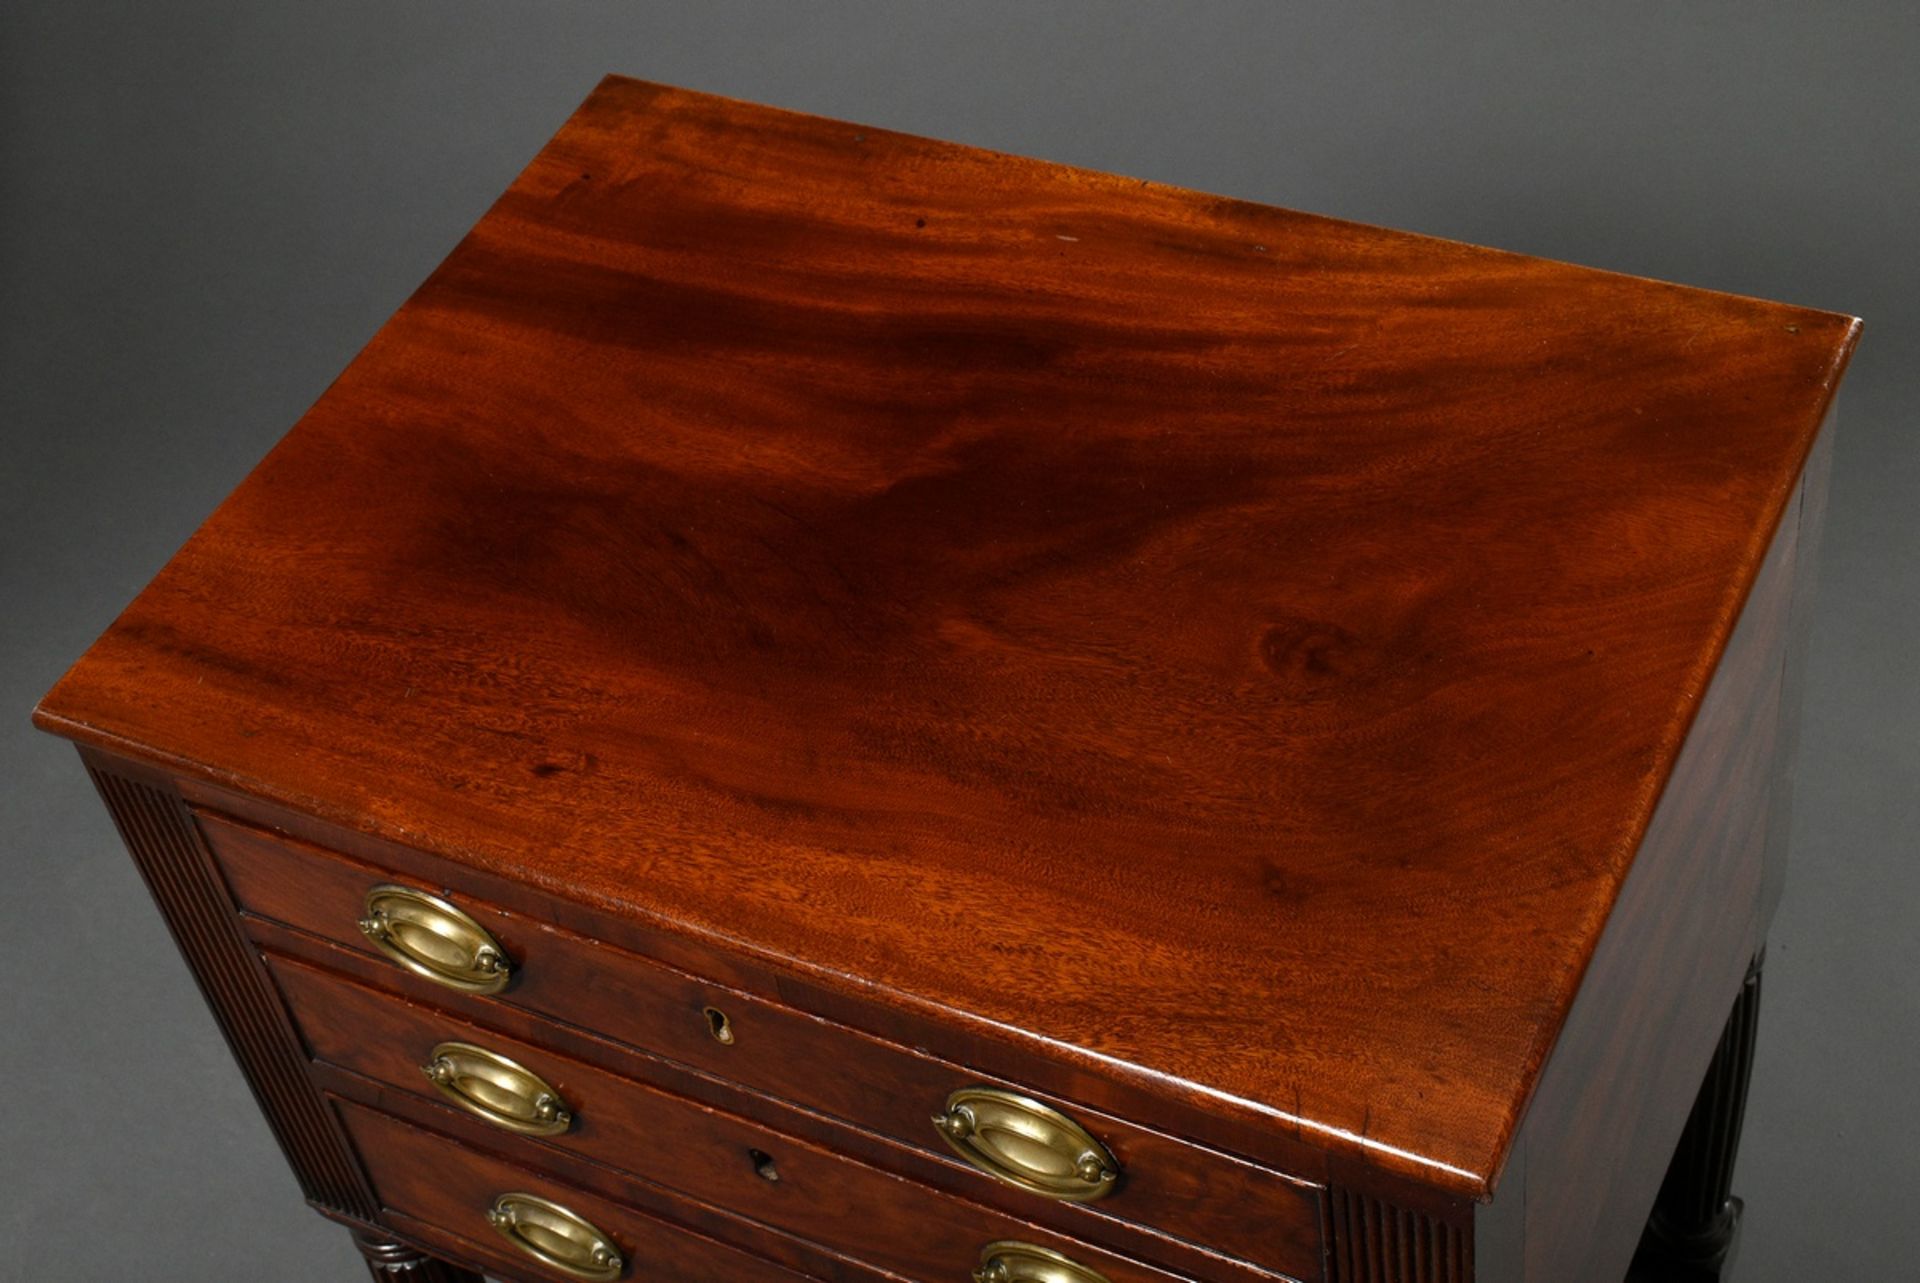 Three-bay occasional furniture on fluted legs with pull-out writing drawer and punched leather top, - Image 2 of 6